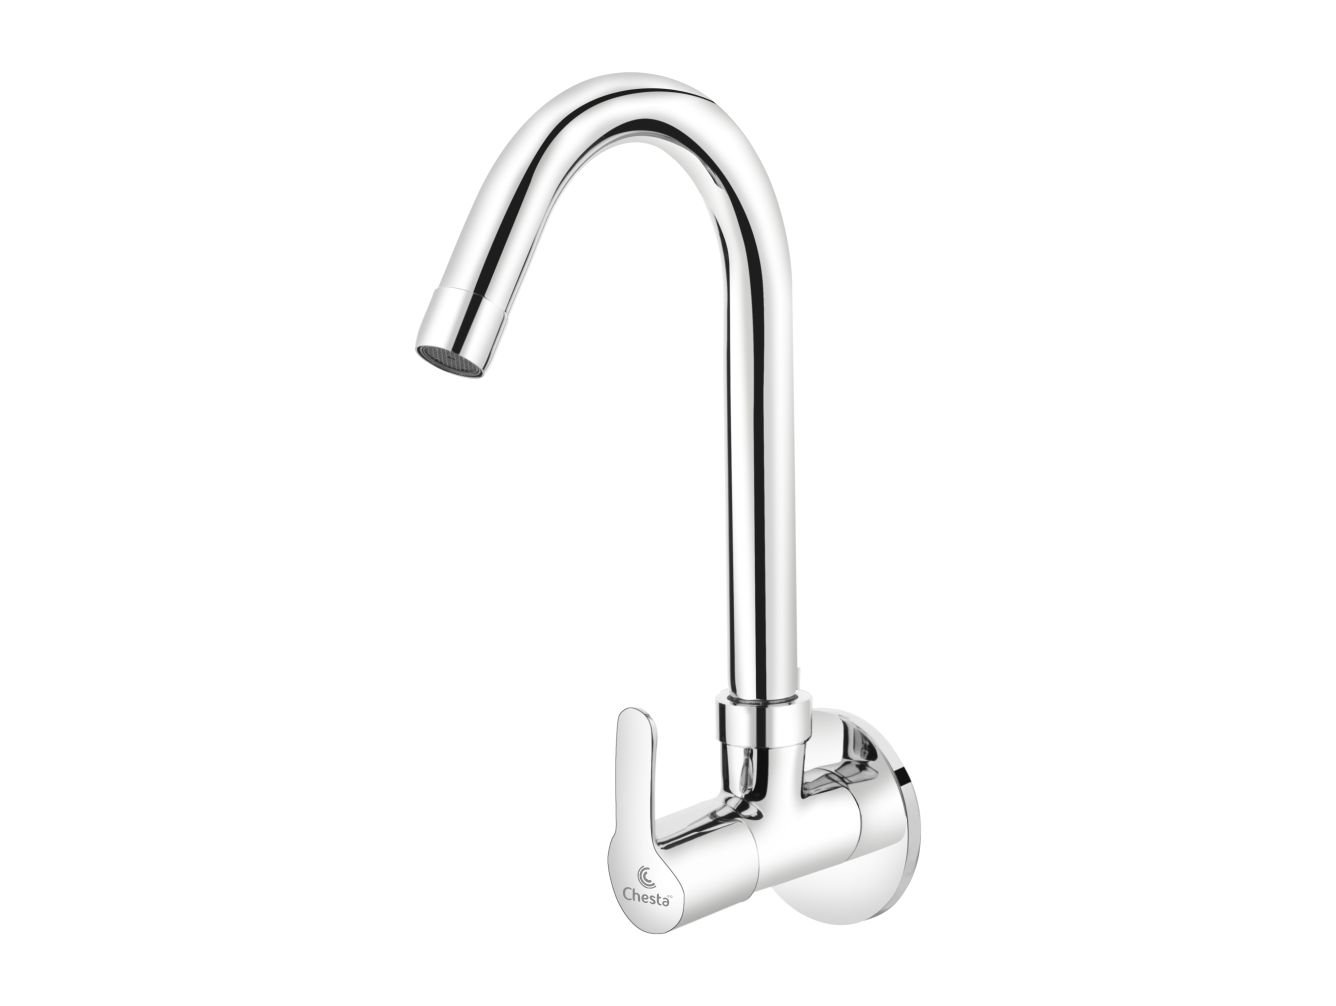 DR - 1007 - Sink Cock with Wall Flange by Chesta Bath